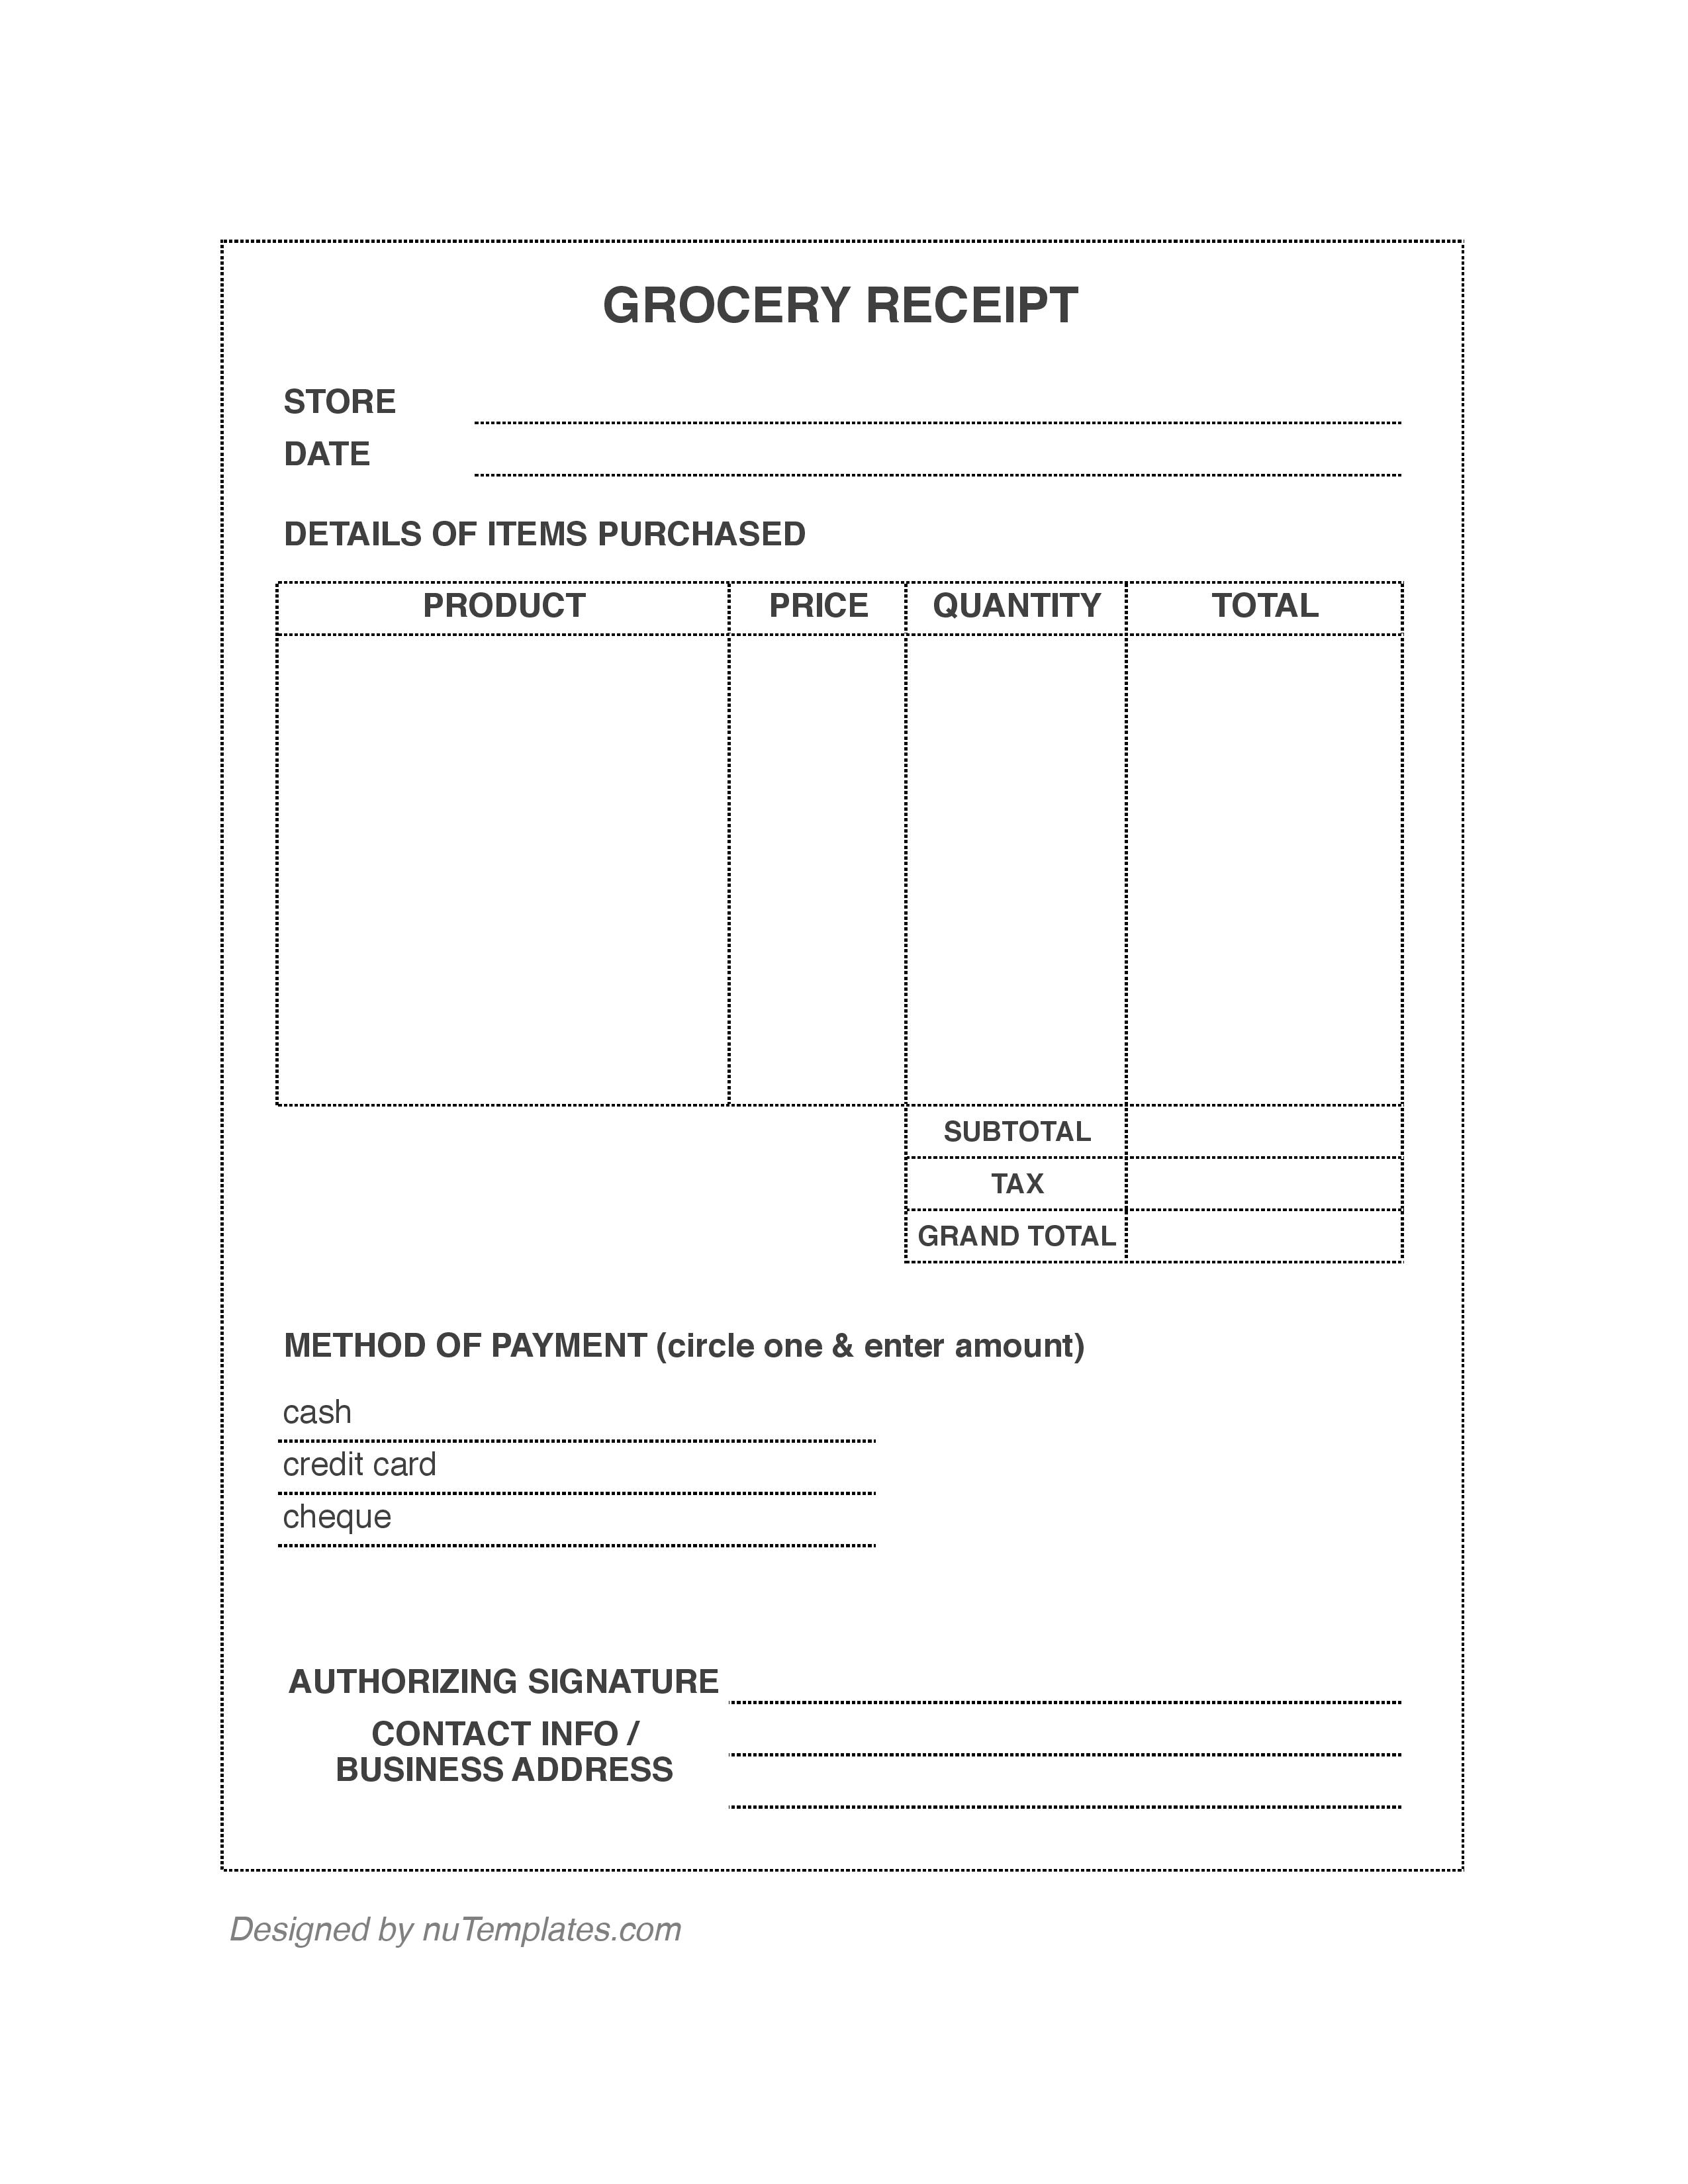 grocery-receipt-template